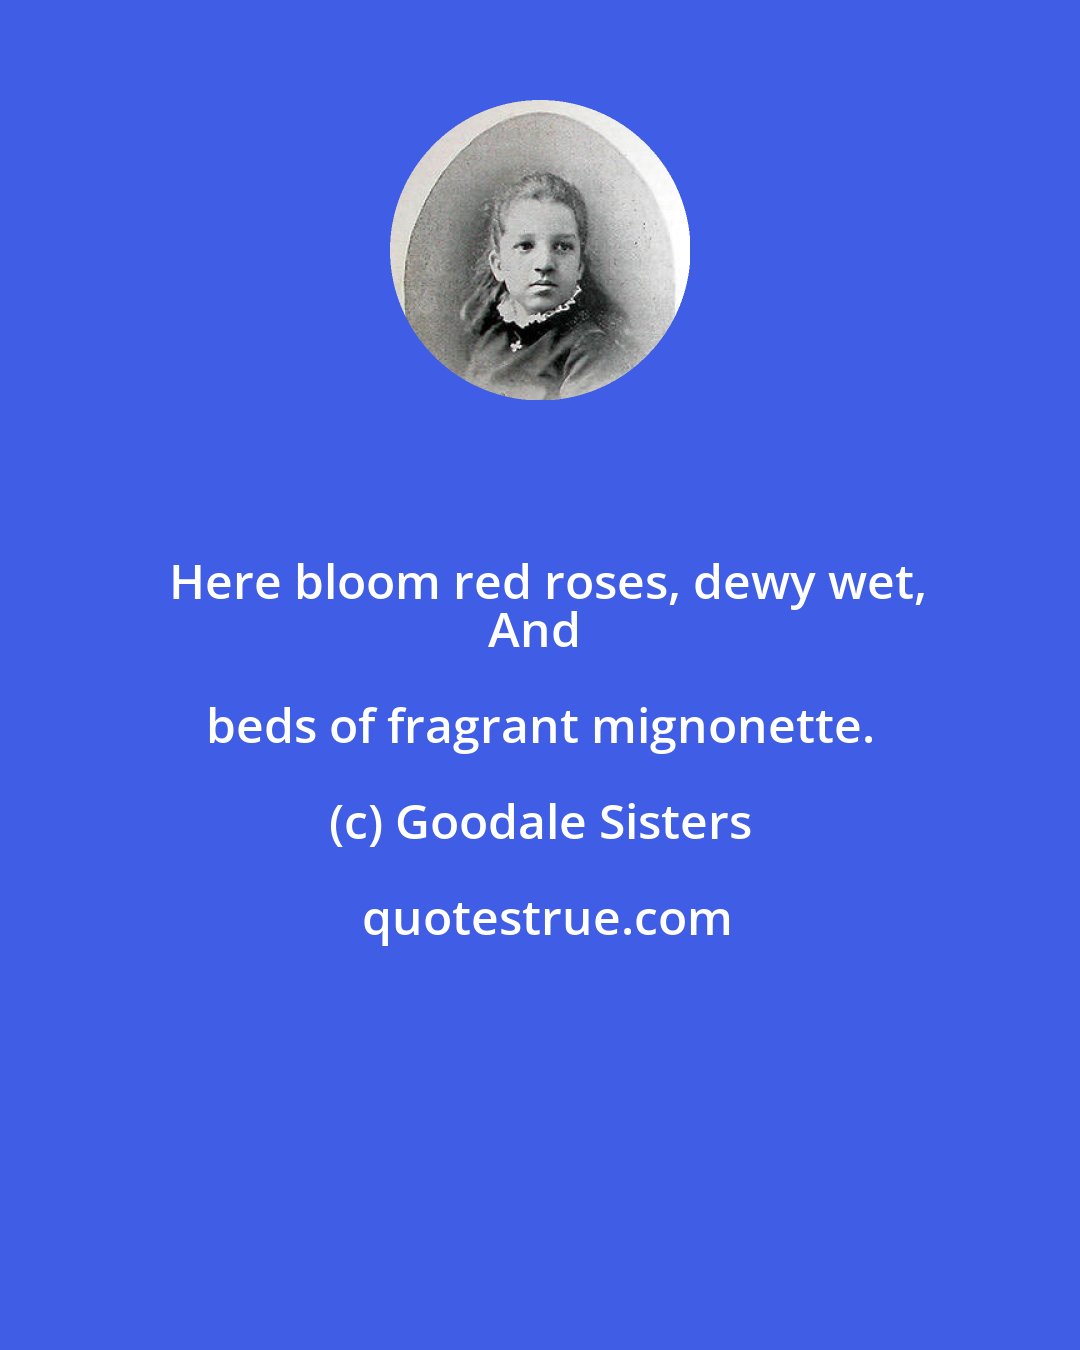 Goodale Sisters: Here bloom red roses, dewy wet,
And beds of fragrant mignonette.